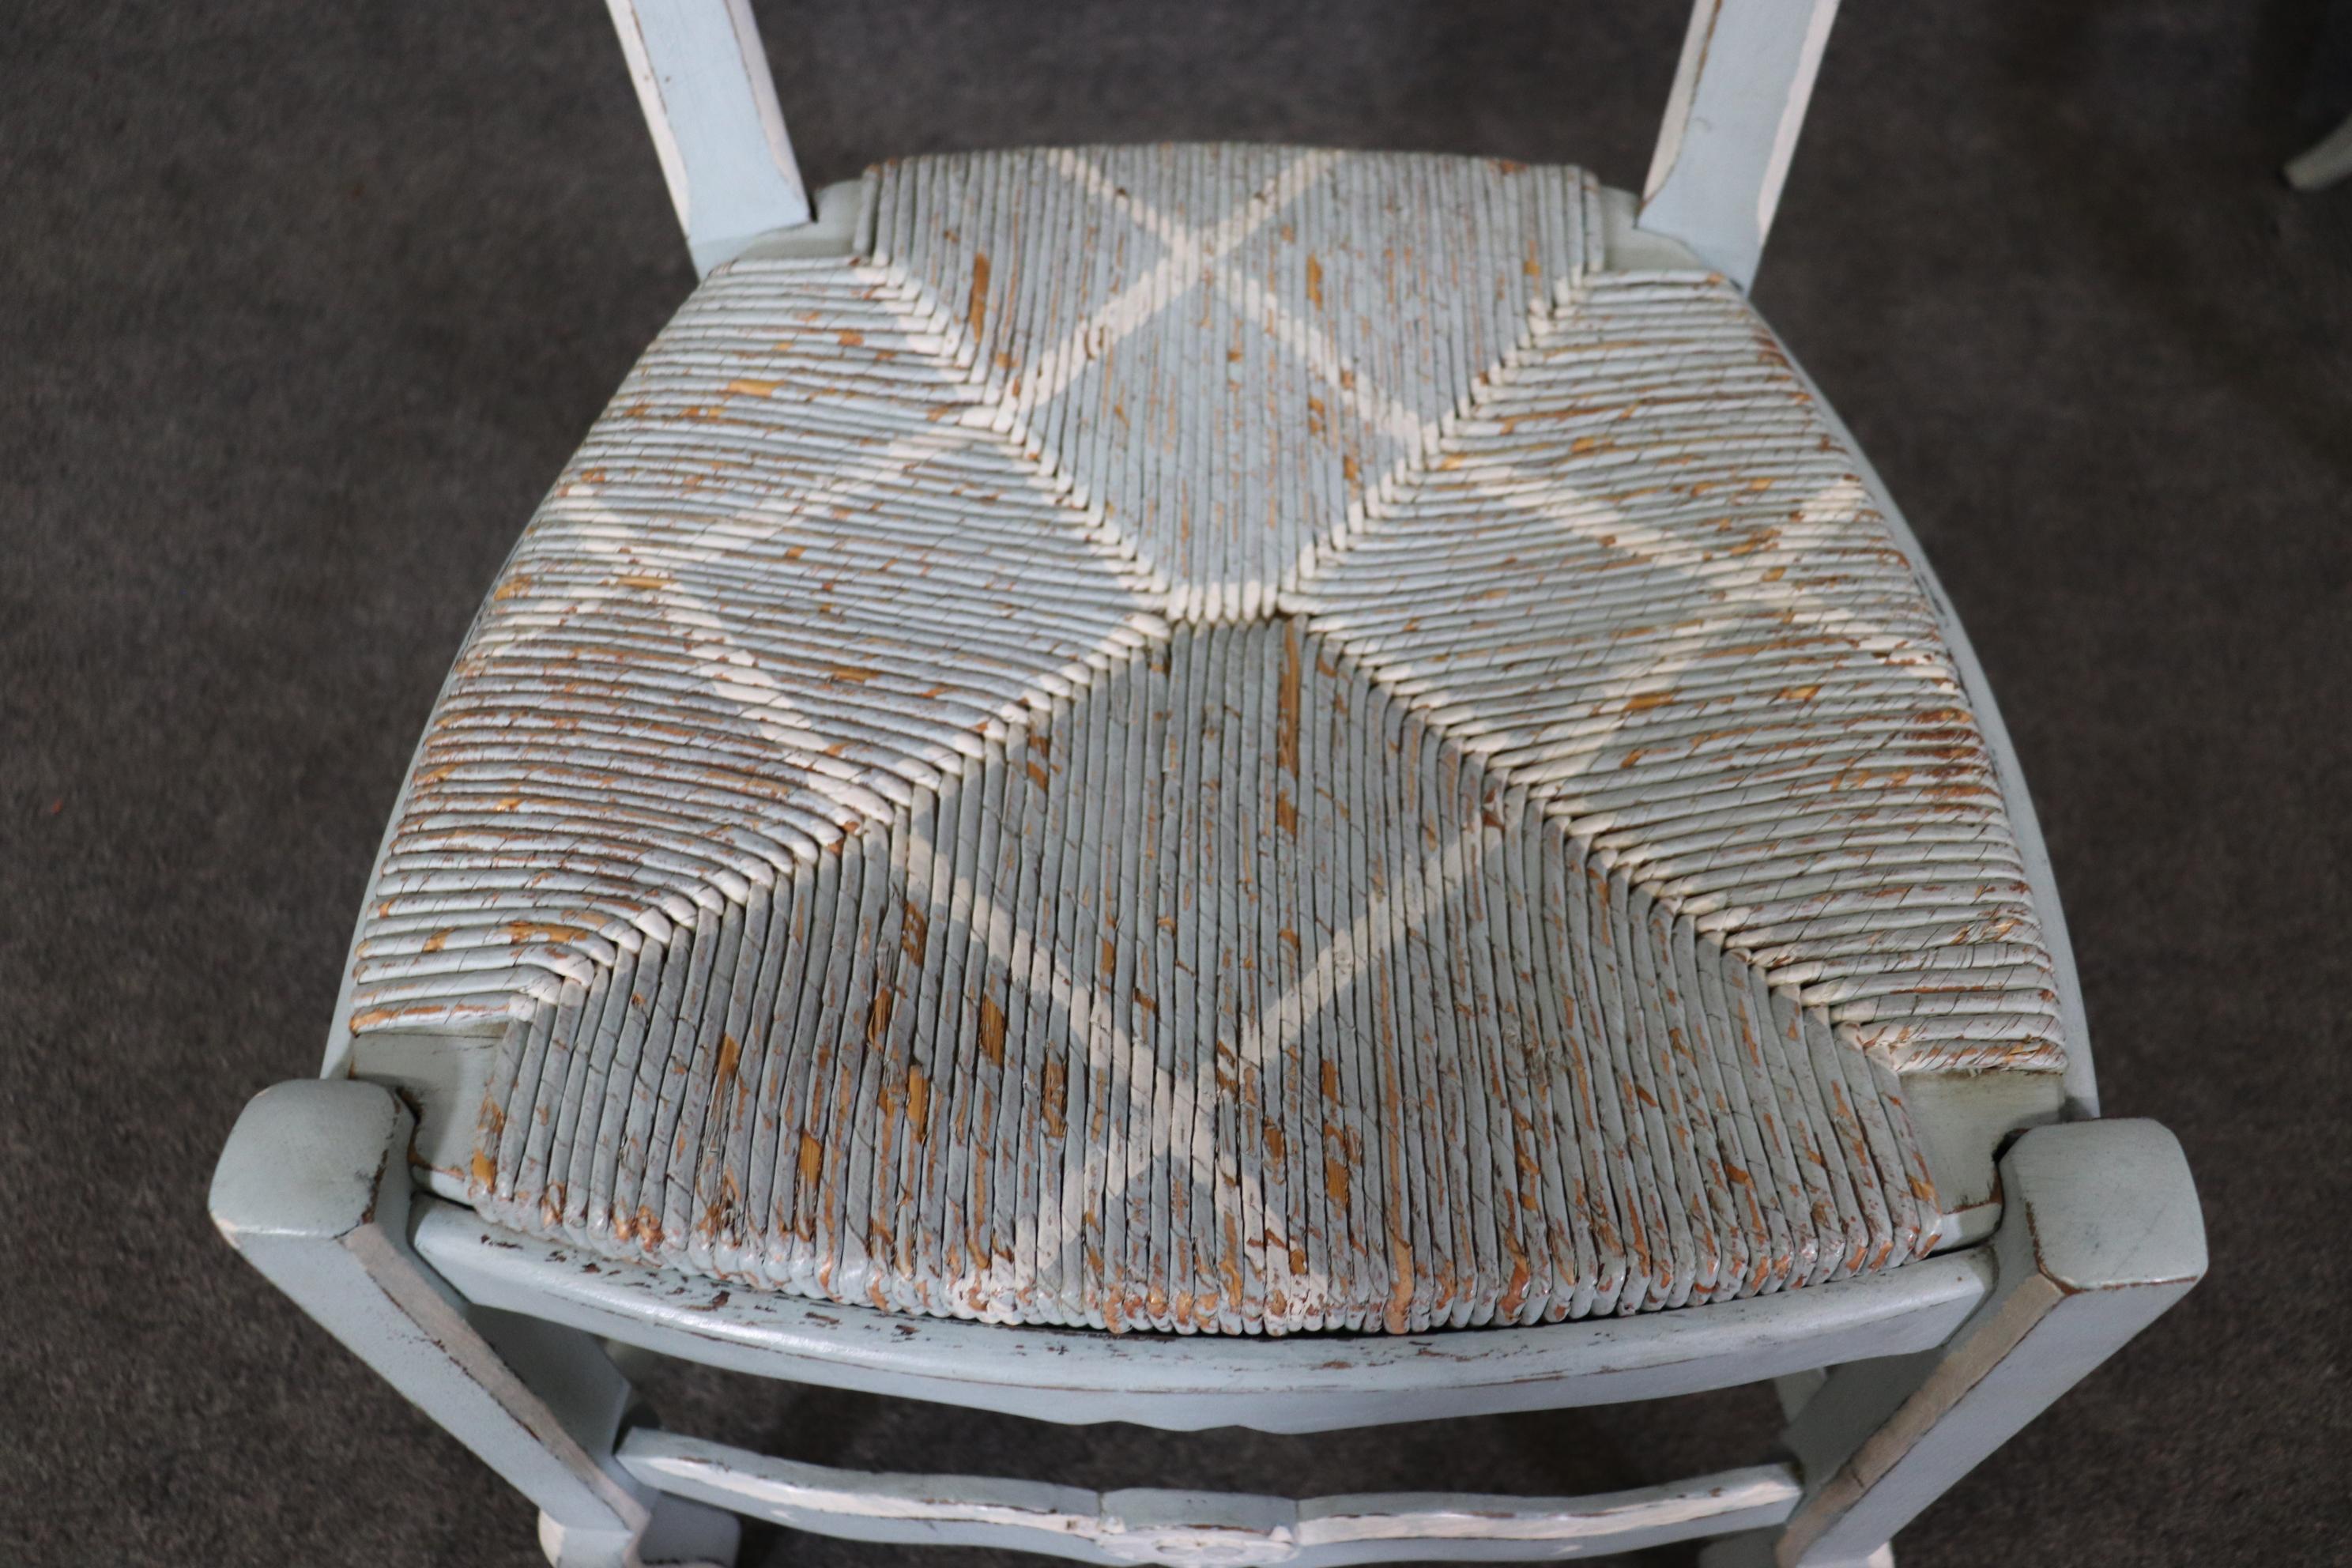 This is a gorgeous set of rush seated country chairs made in France and they are painted in a distressed blue and white finish with a cross hatched design on the seats. They are in good vintage condition with signs of distressing and signs of use